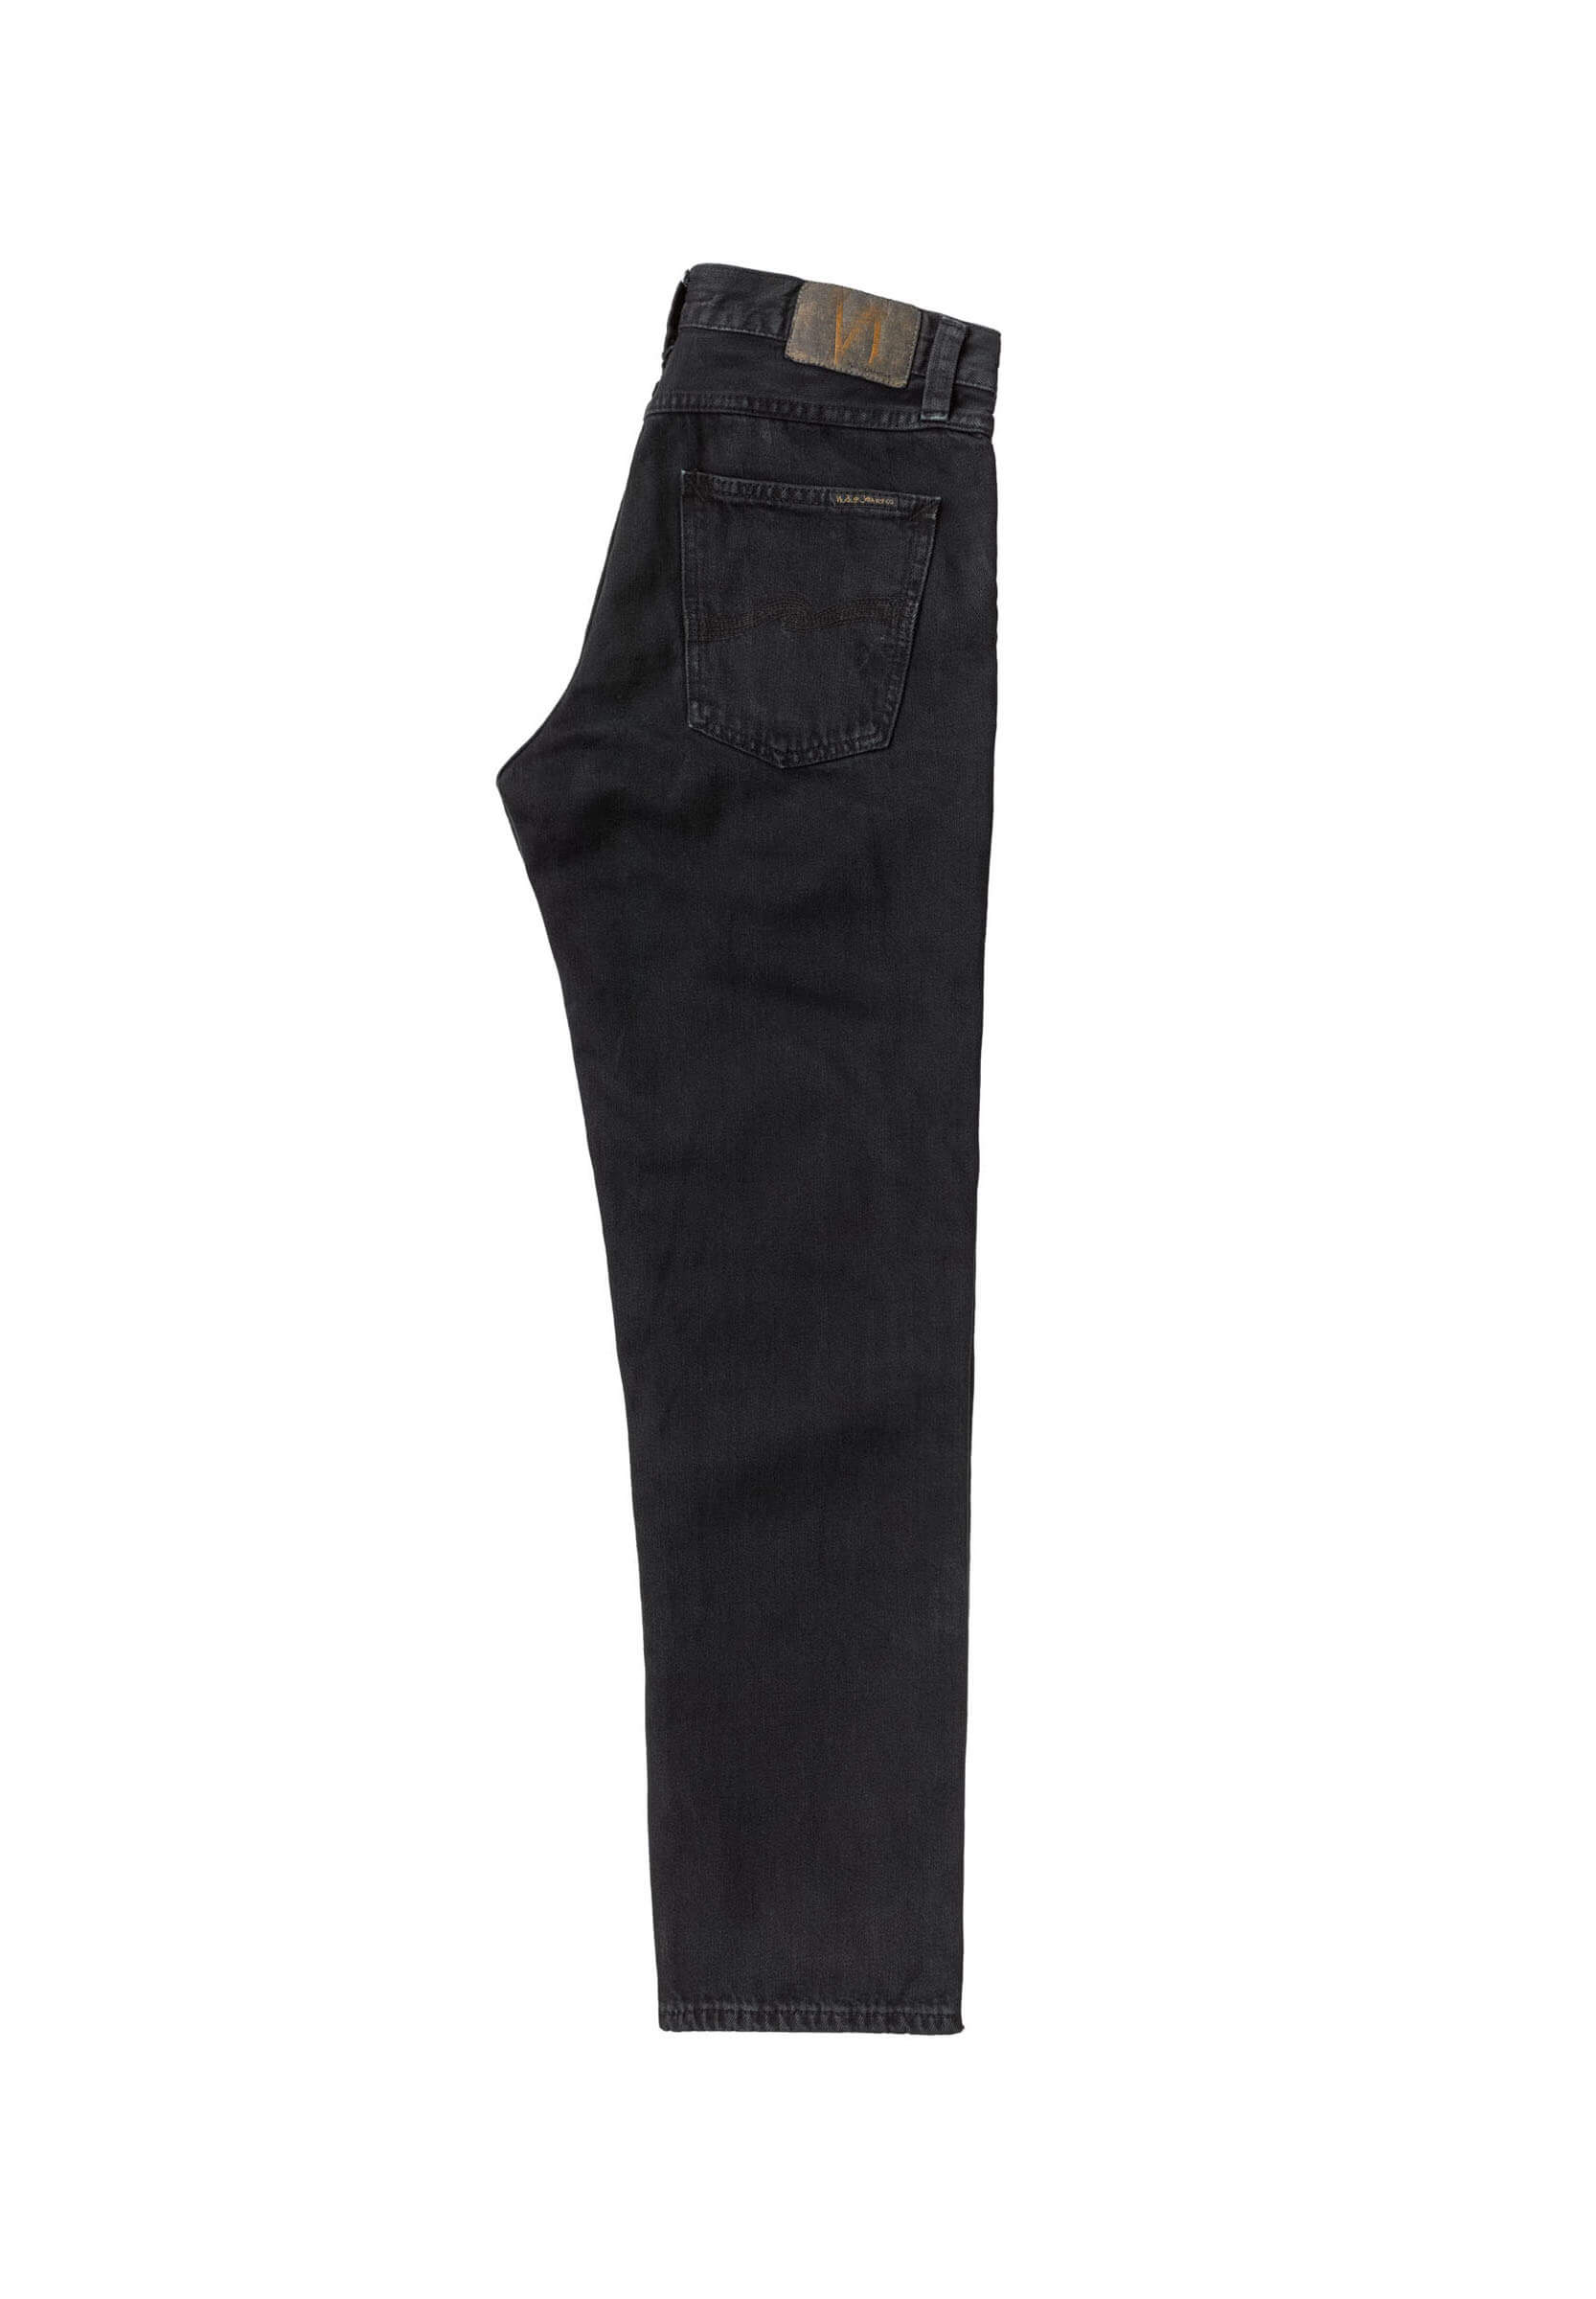 NUDIE JEANS Jeans Gritty Jackson black forest 29/30